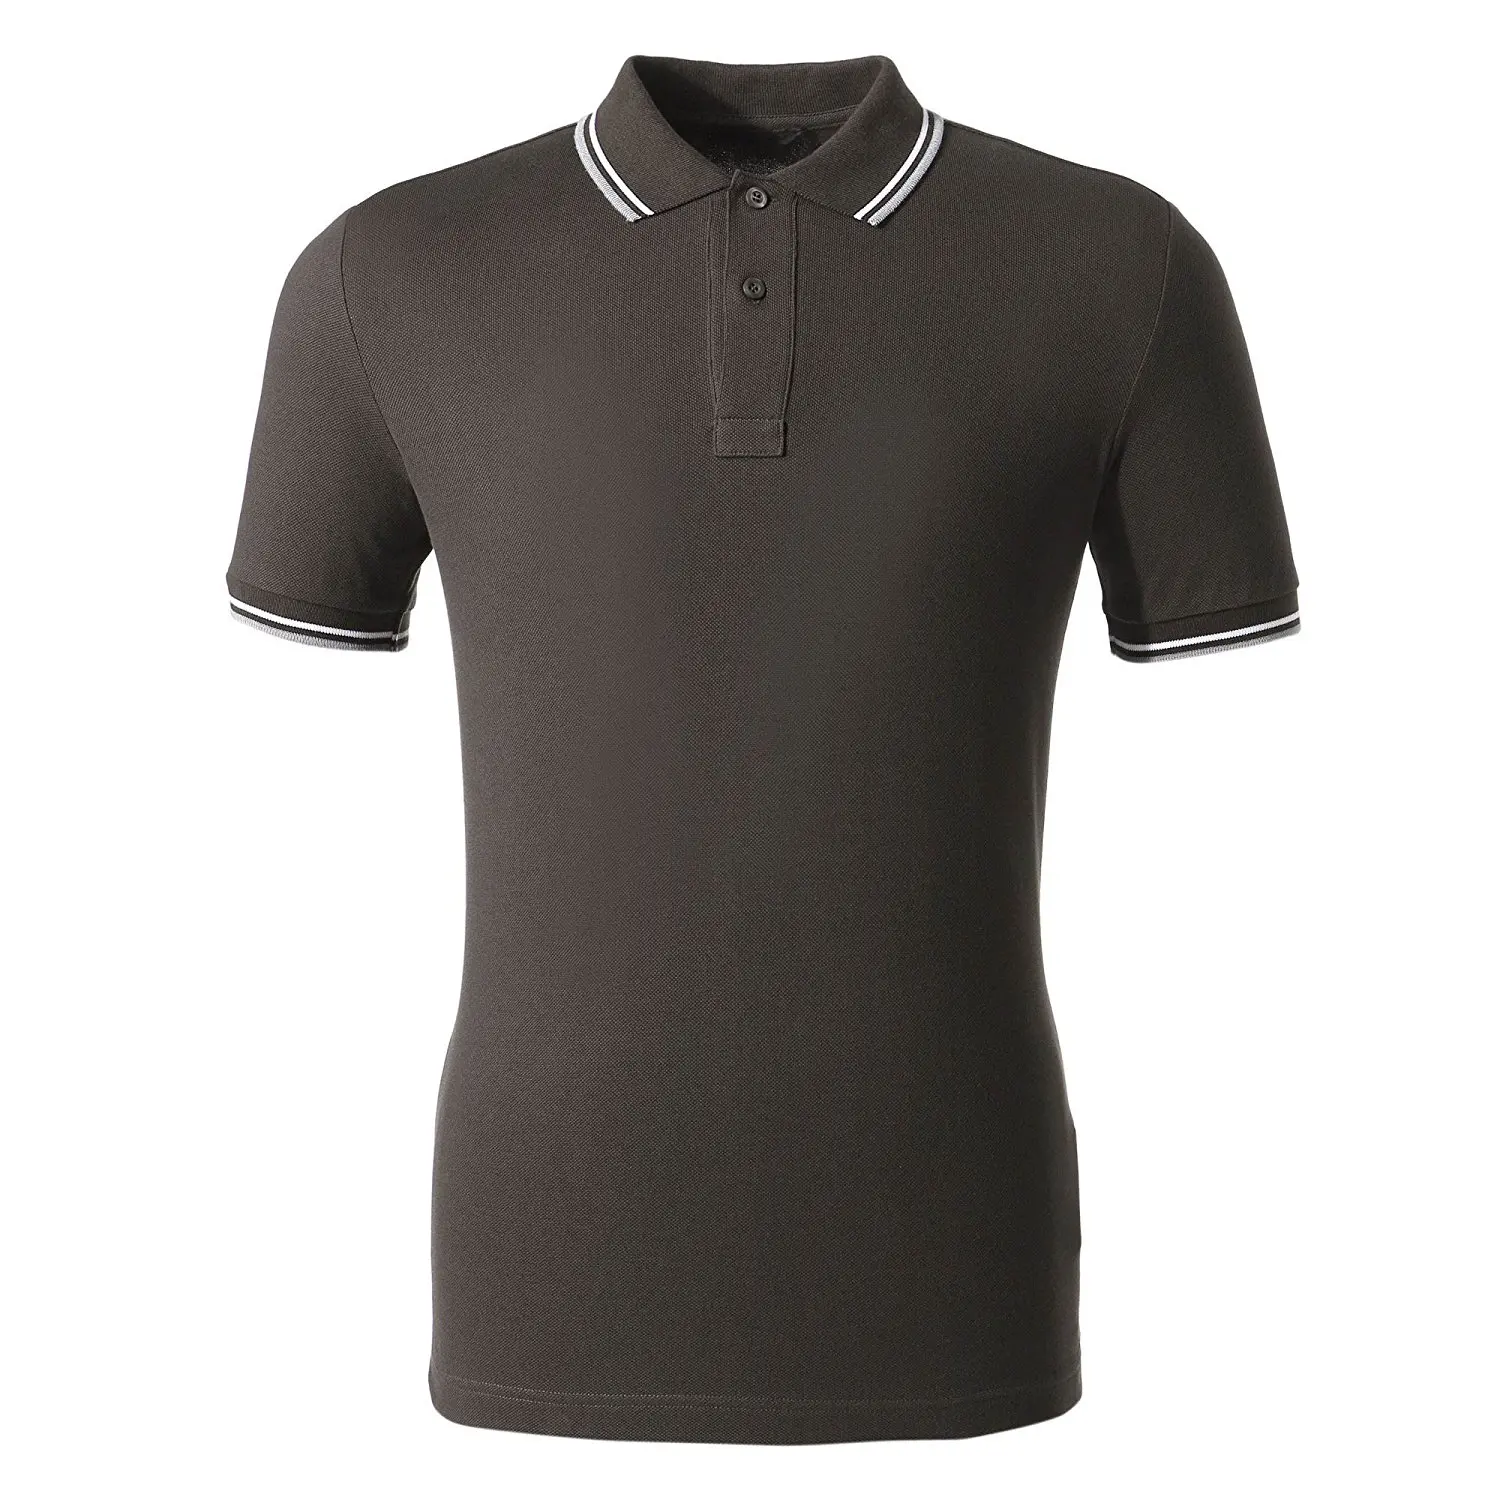 Cheap Mens Polo Tees, find Mens Polo Tees deals on line at Alibaba.com